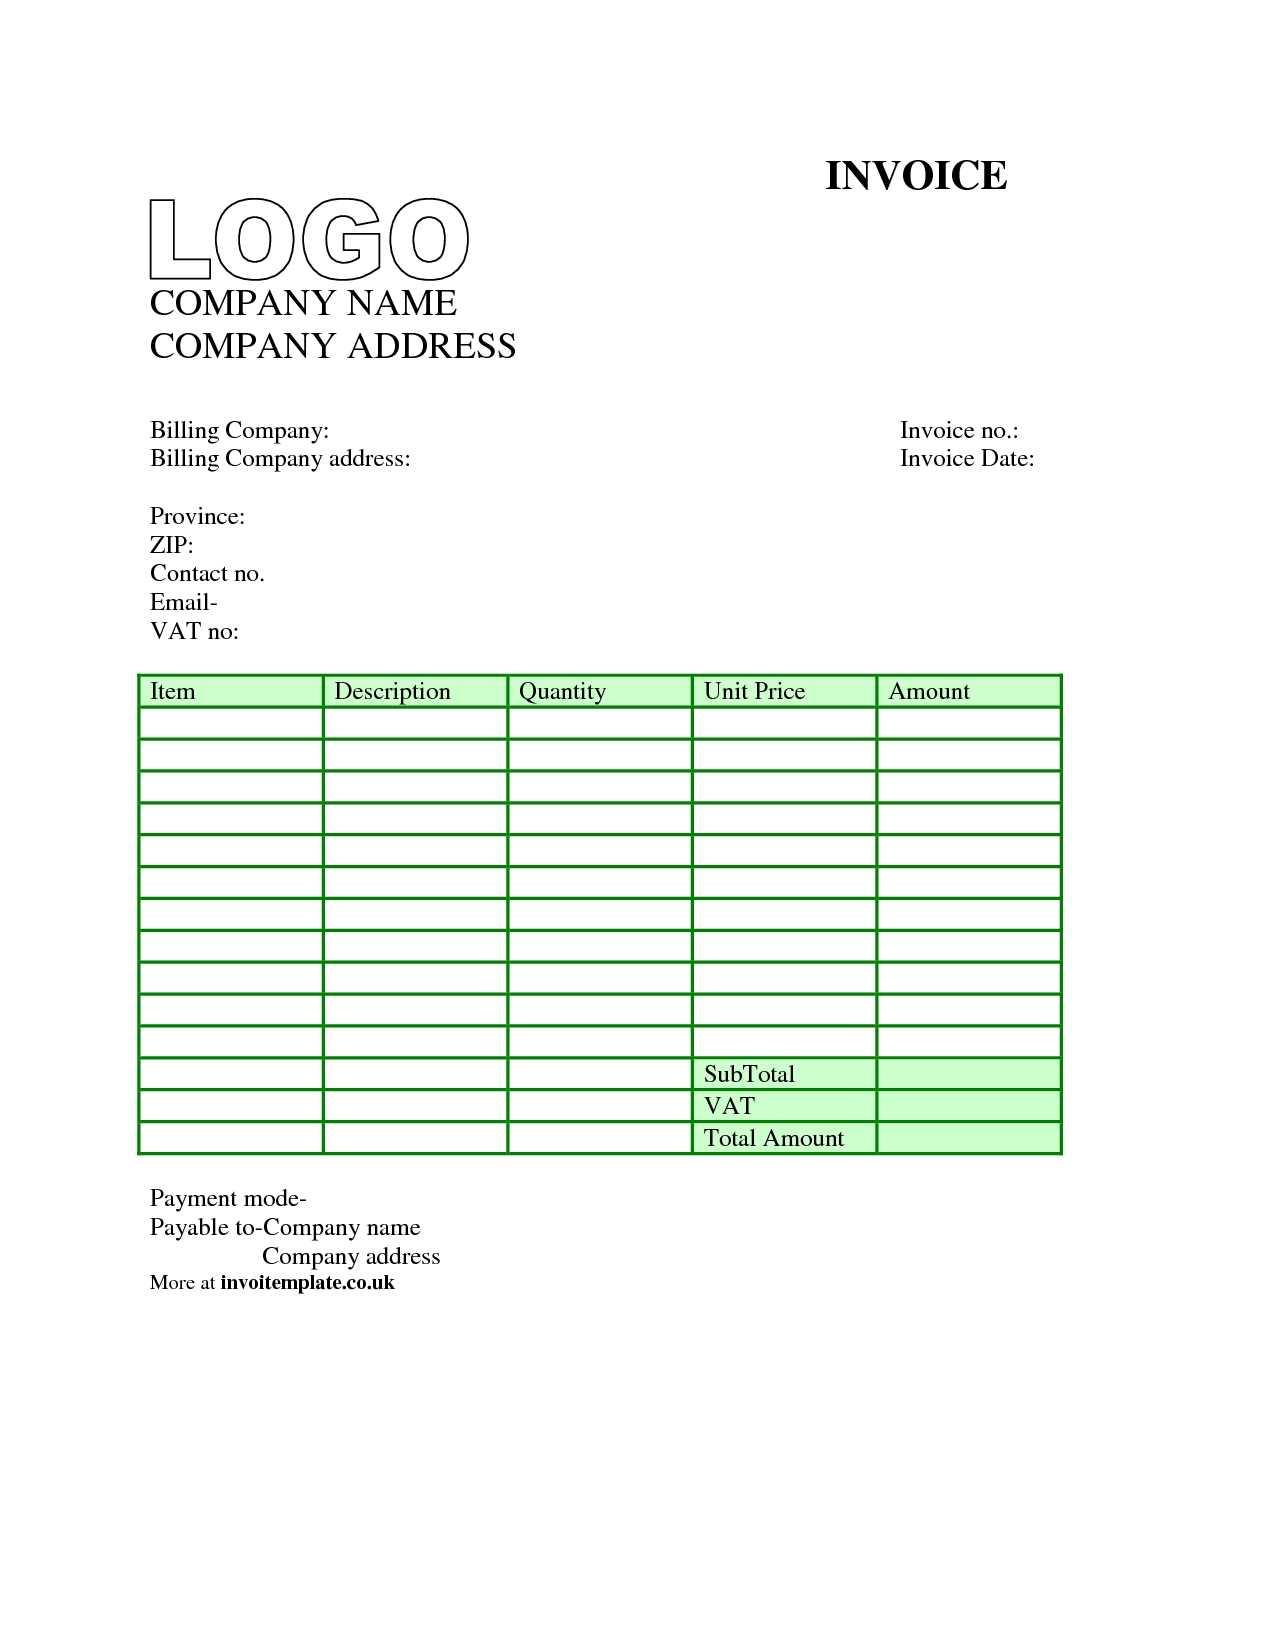 12 best photos of free invoice template downloads free invoice invoice sample uk